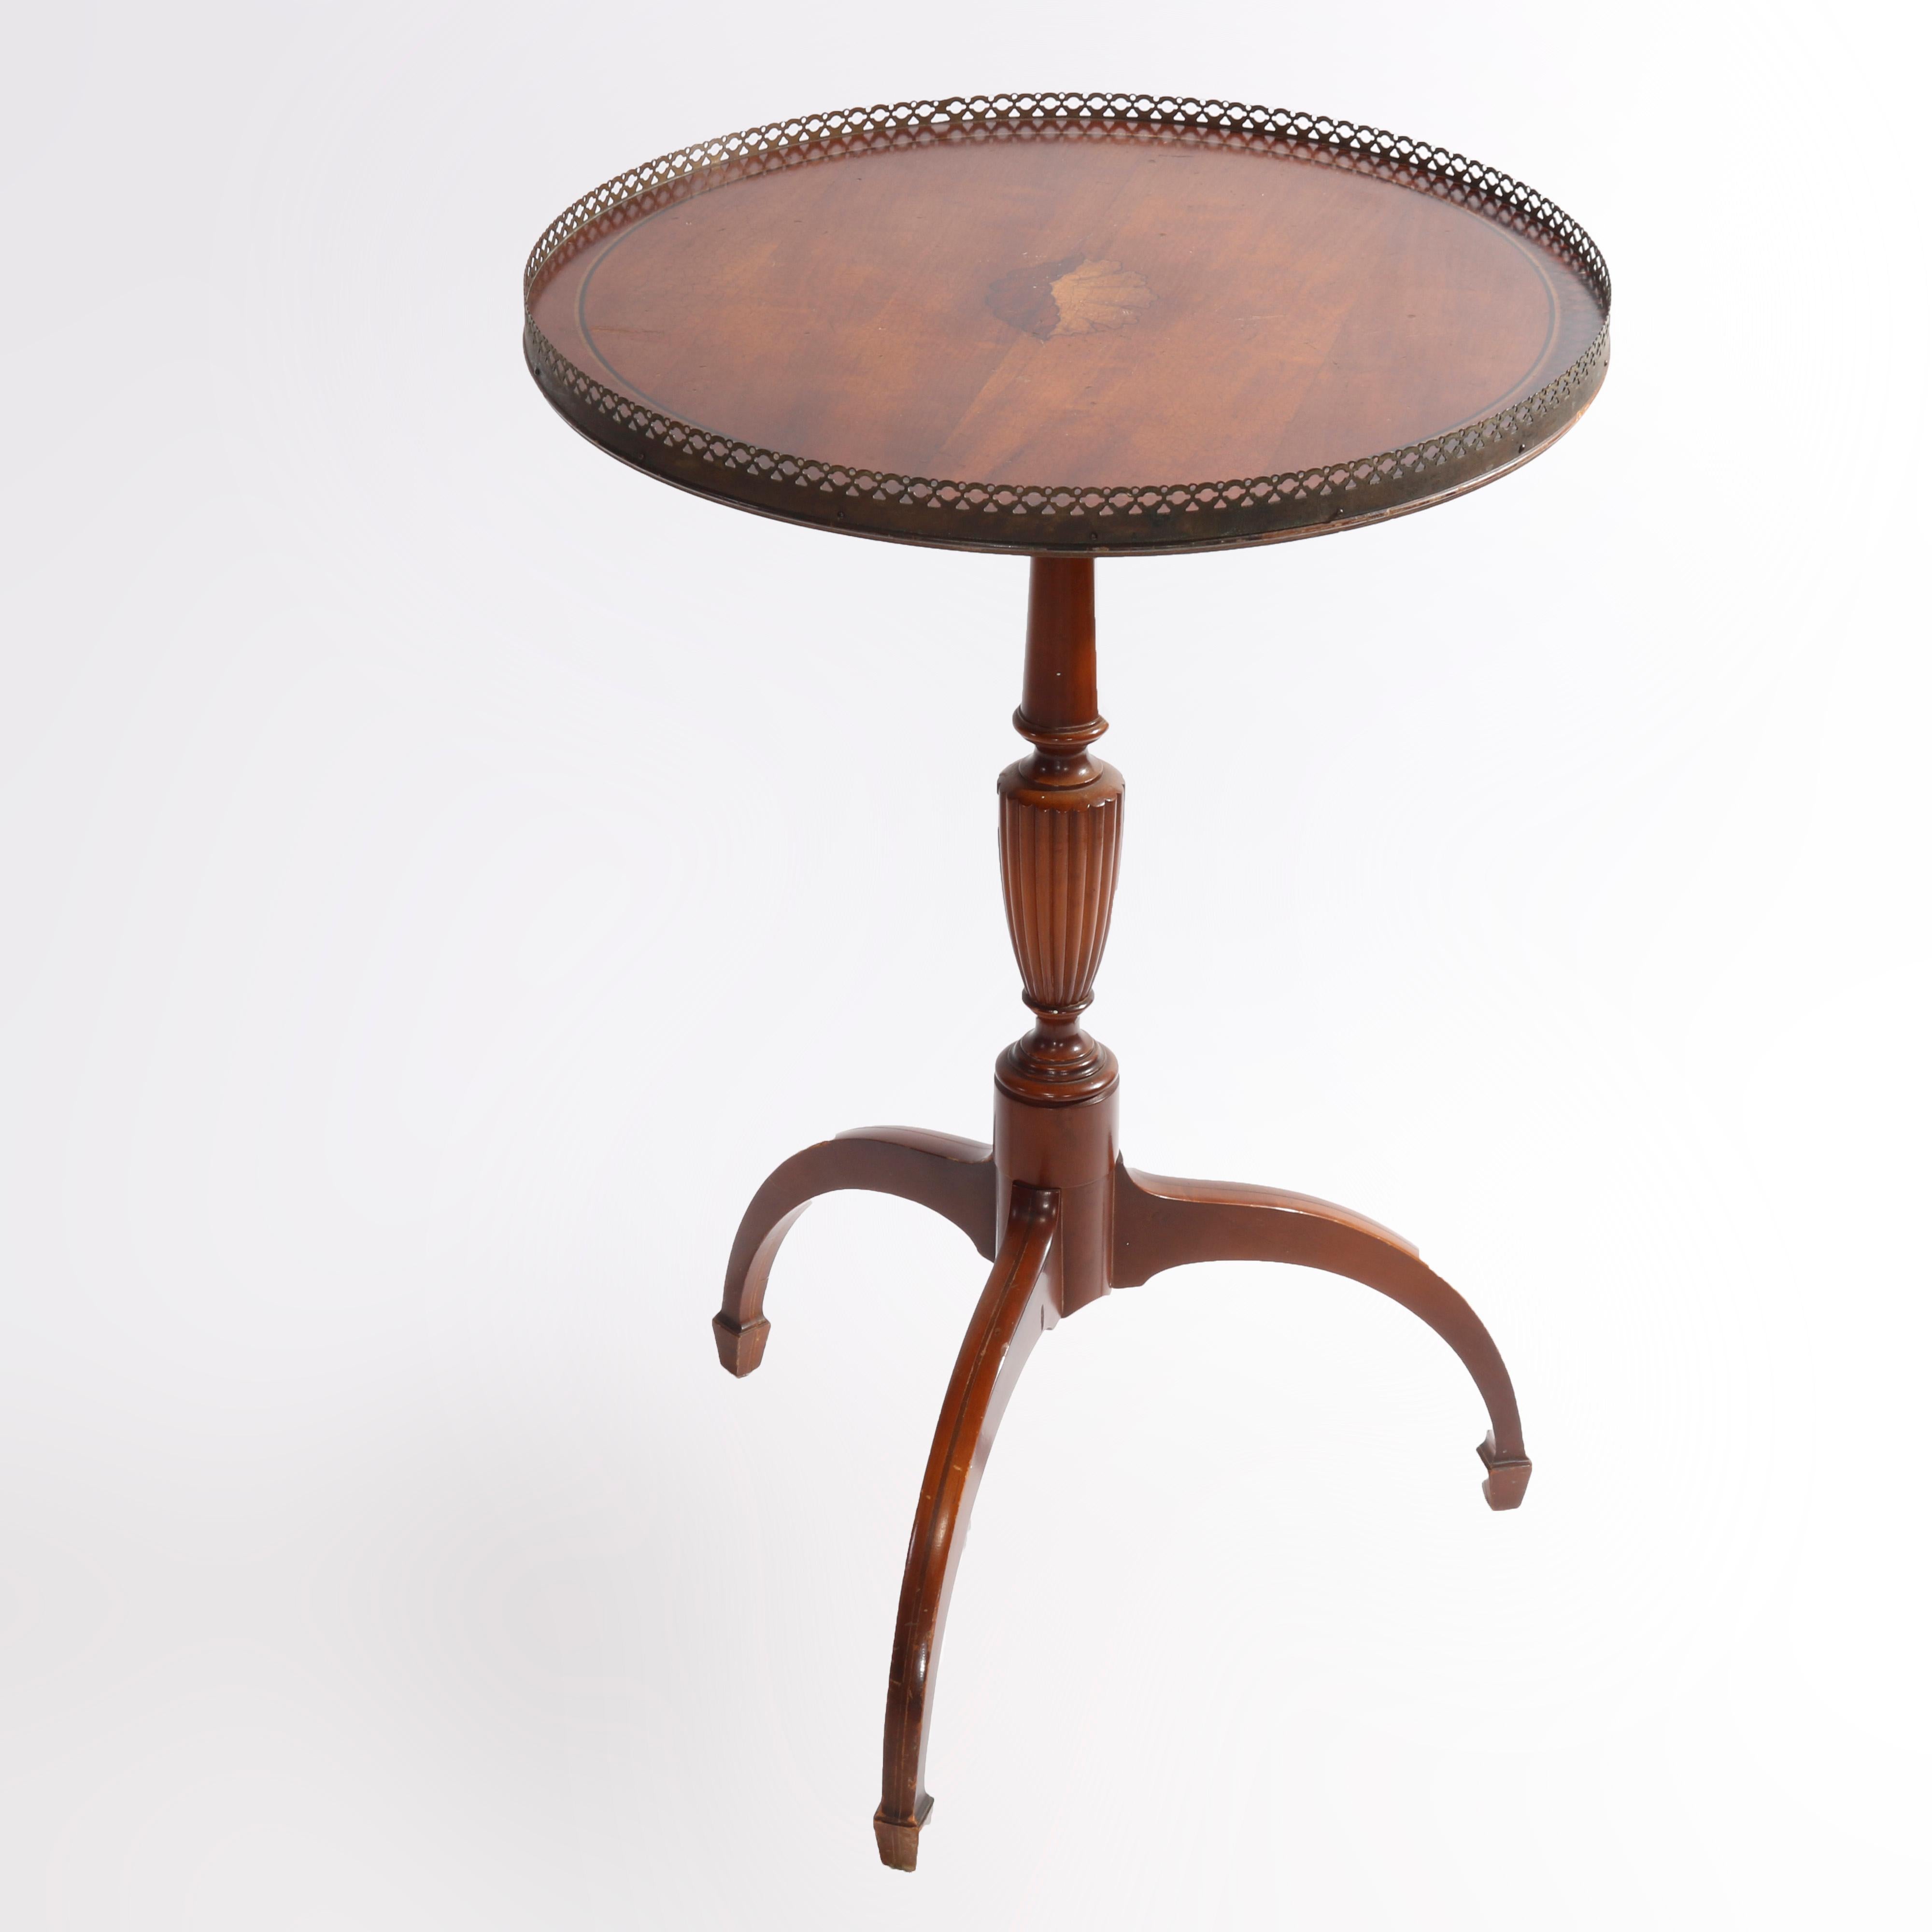 Carved English Regency Mahogany Spider Leg Parlor Table with Inlay Shell Center, c1930 For Sale